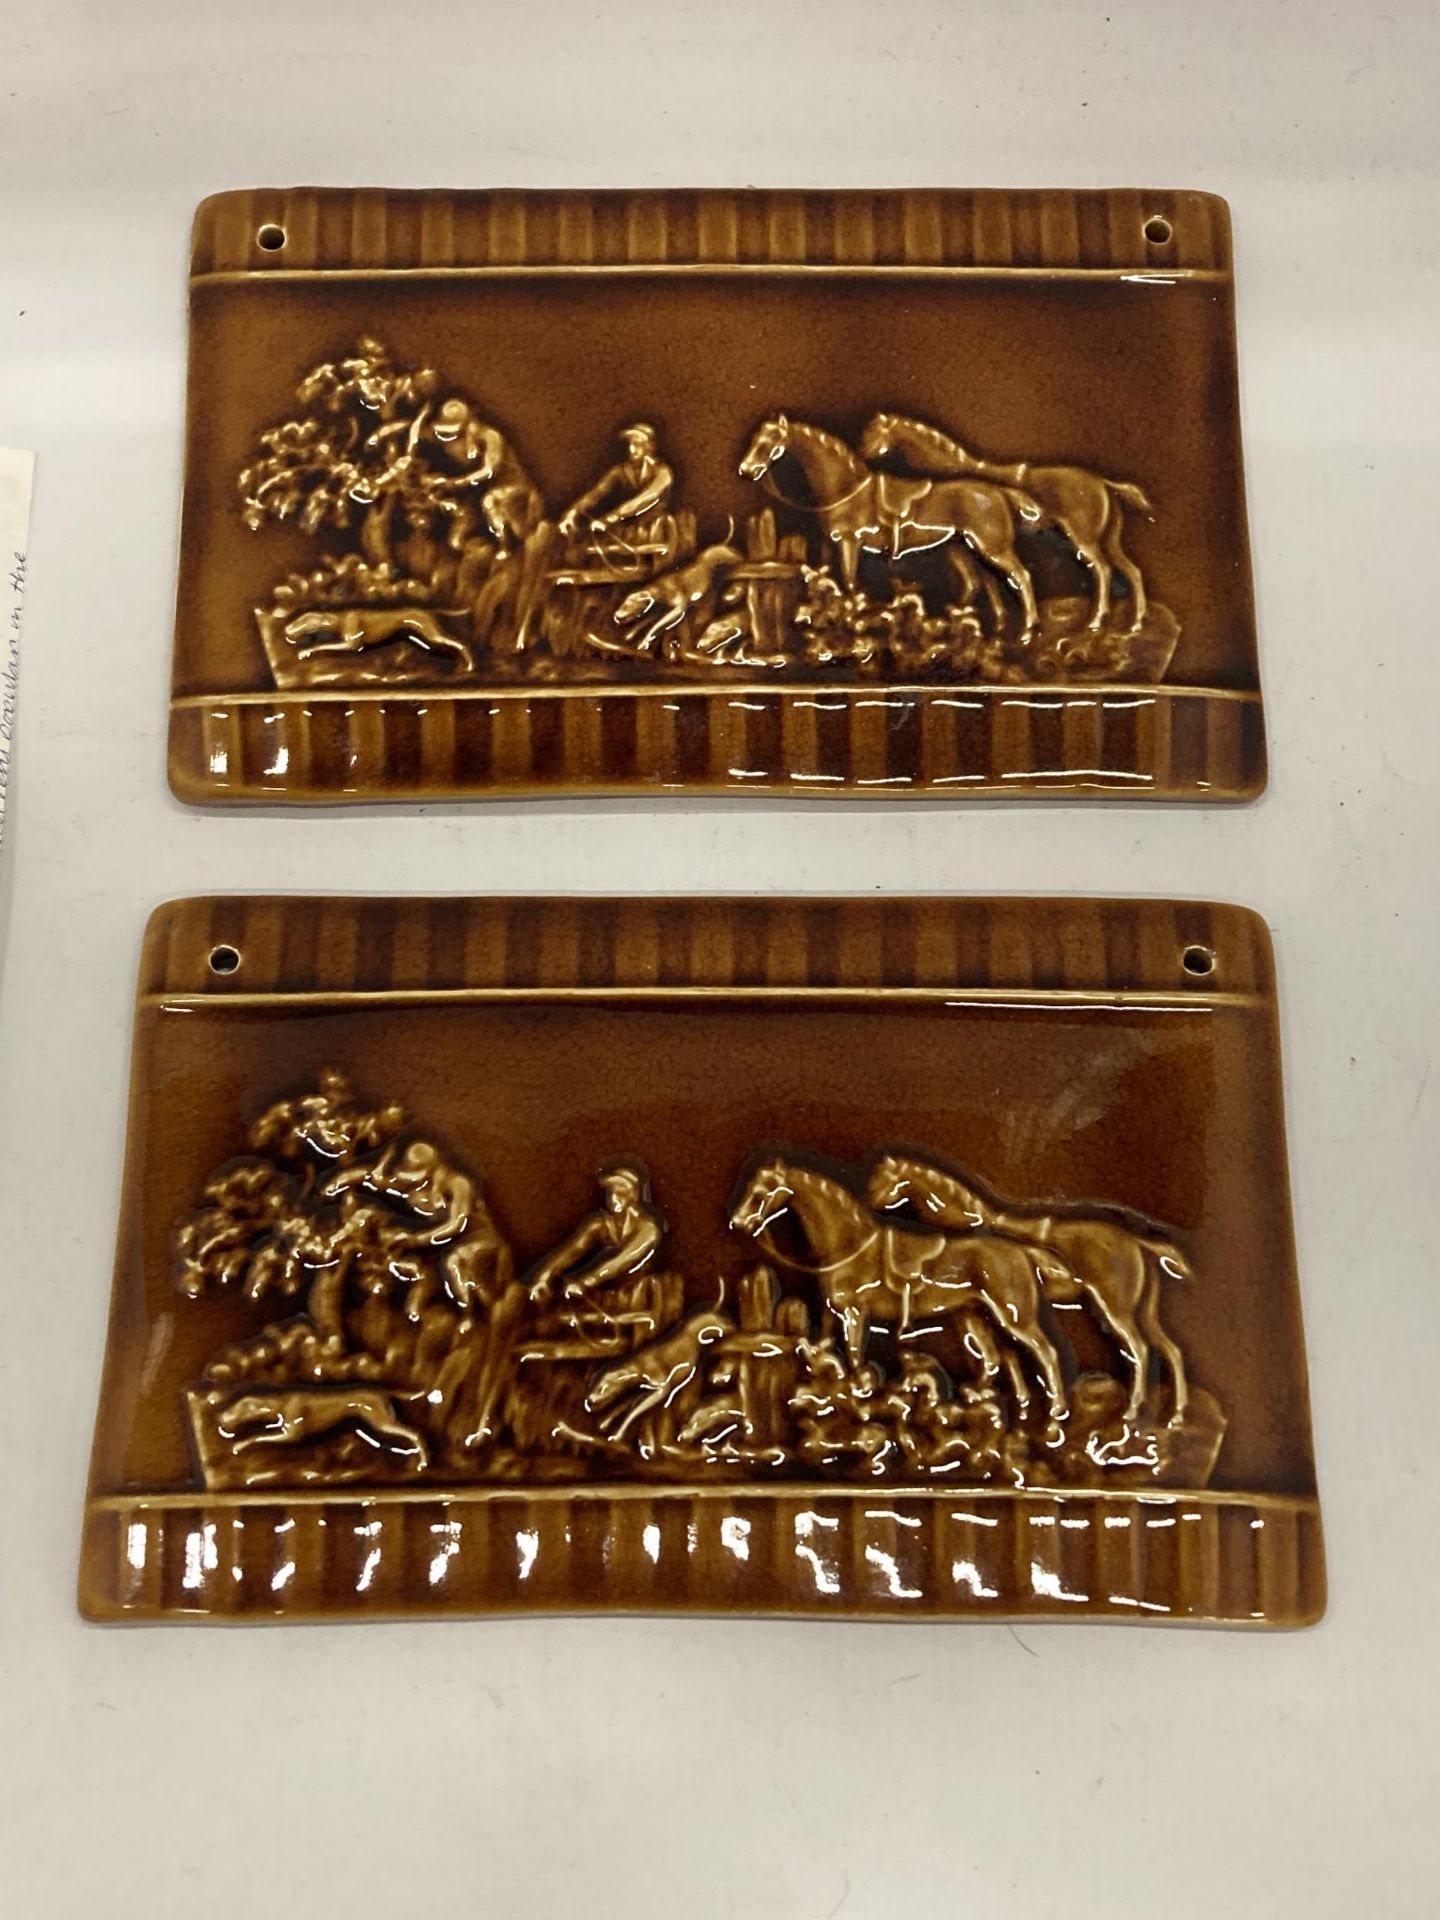 A PAIR OF LATE 19TH CENTURY TREACLE GLAZE EARTHENWARE PLAQUES WITH FOX AND HOUNDS HUNTING DESIGN, 26